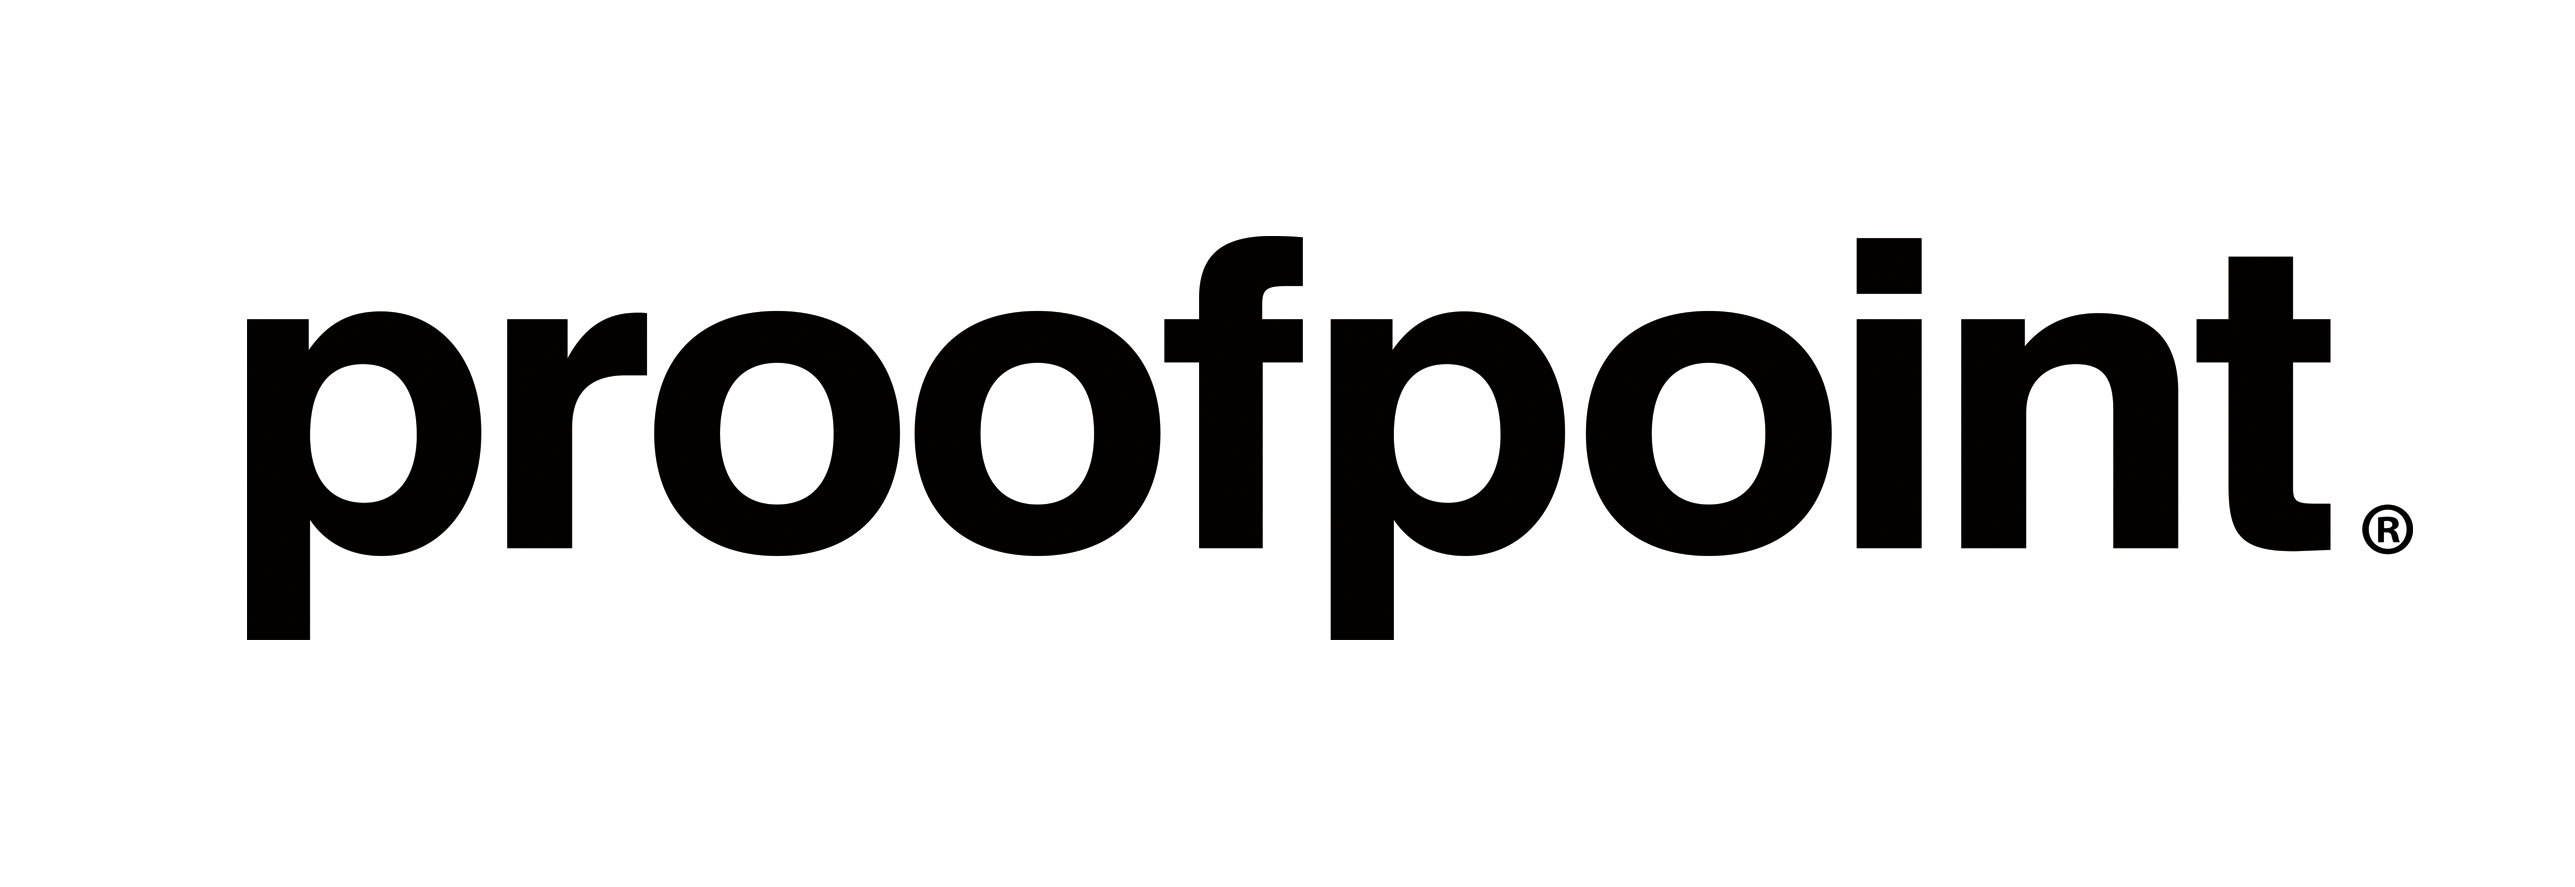 20220615_proofpoint_logo_blacktype_final.png